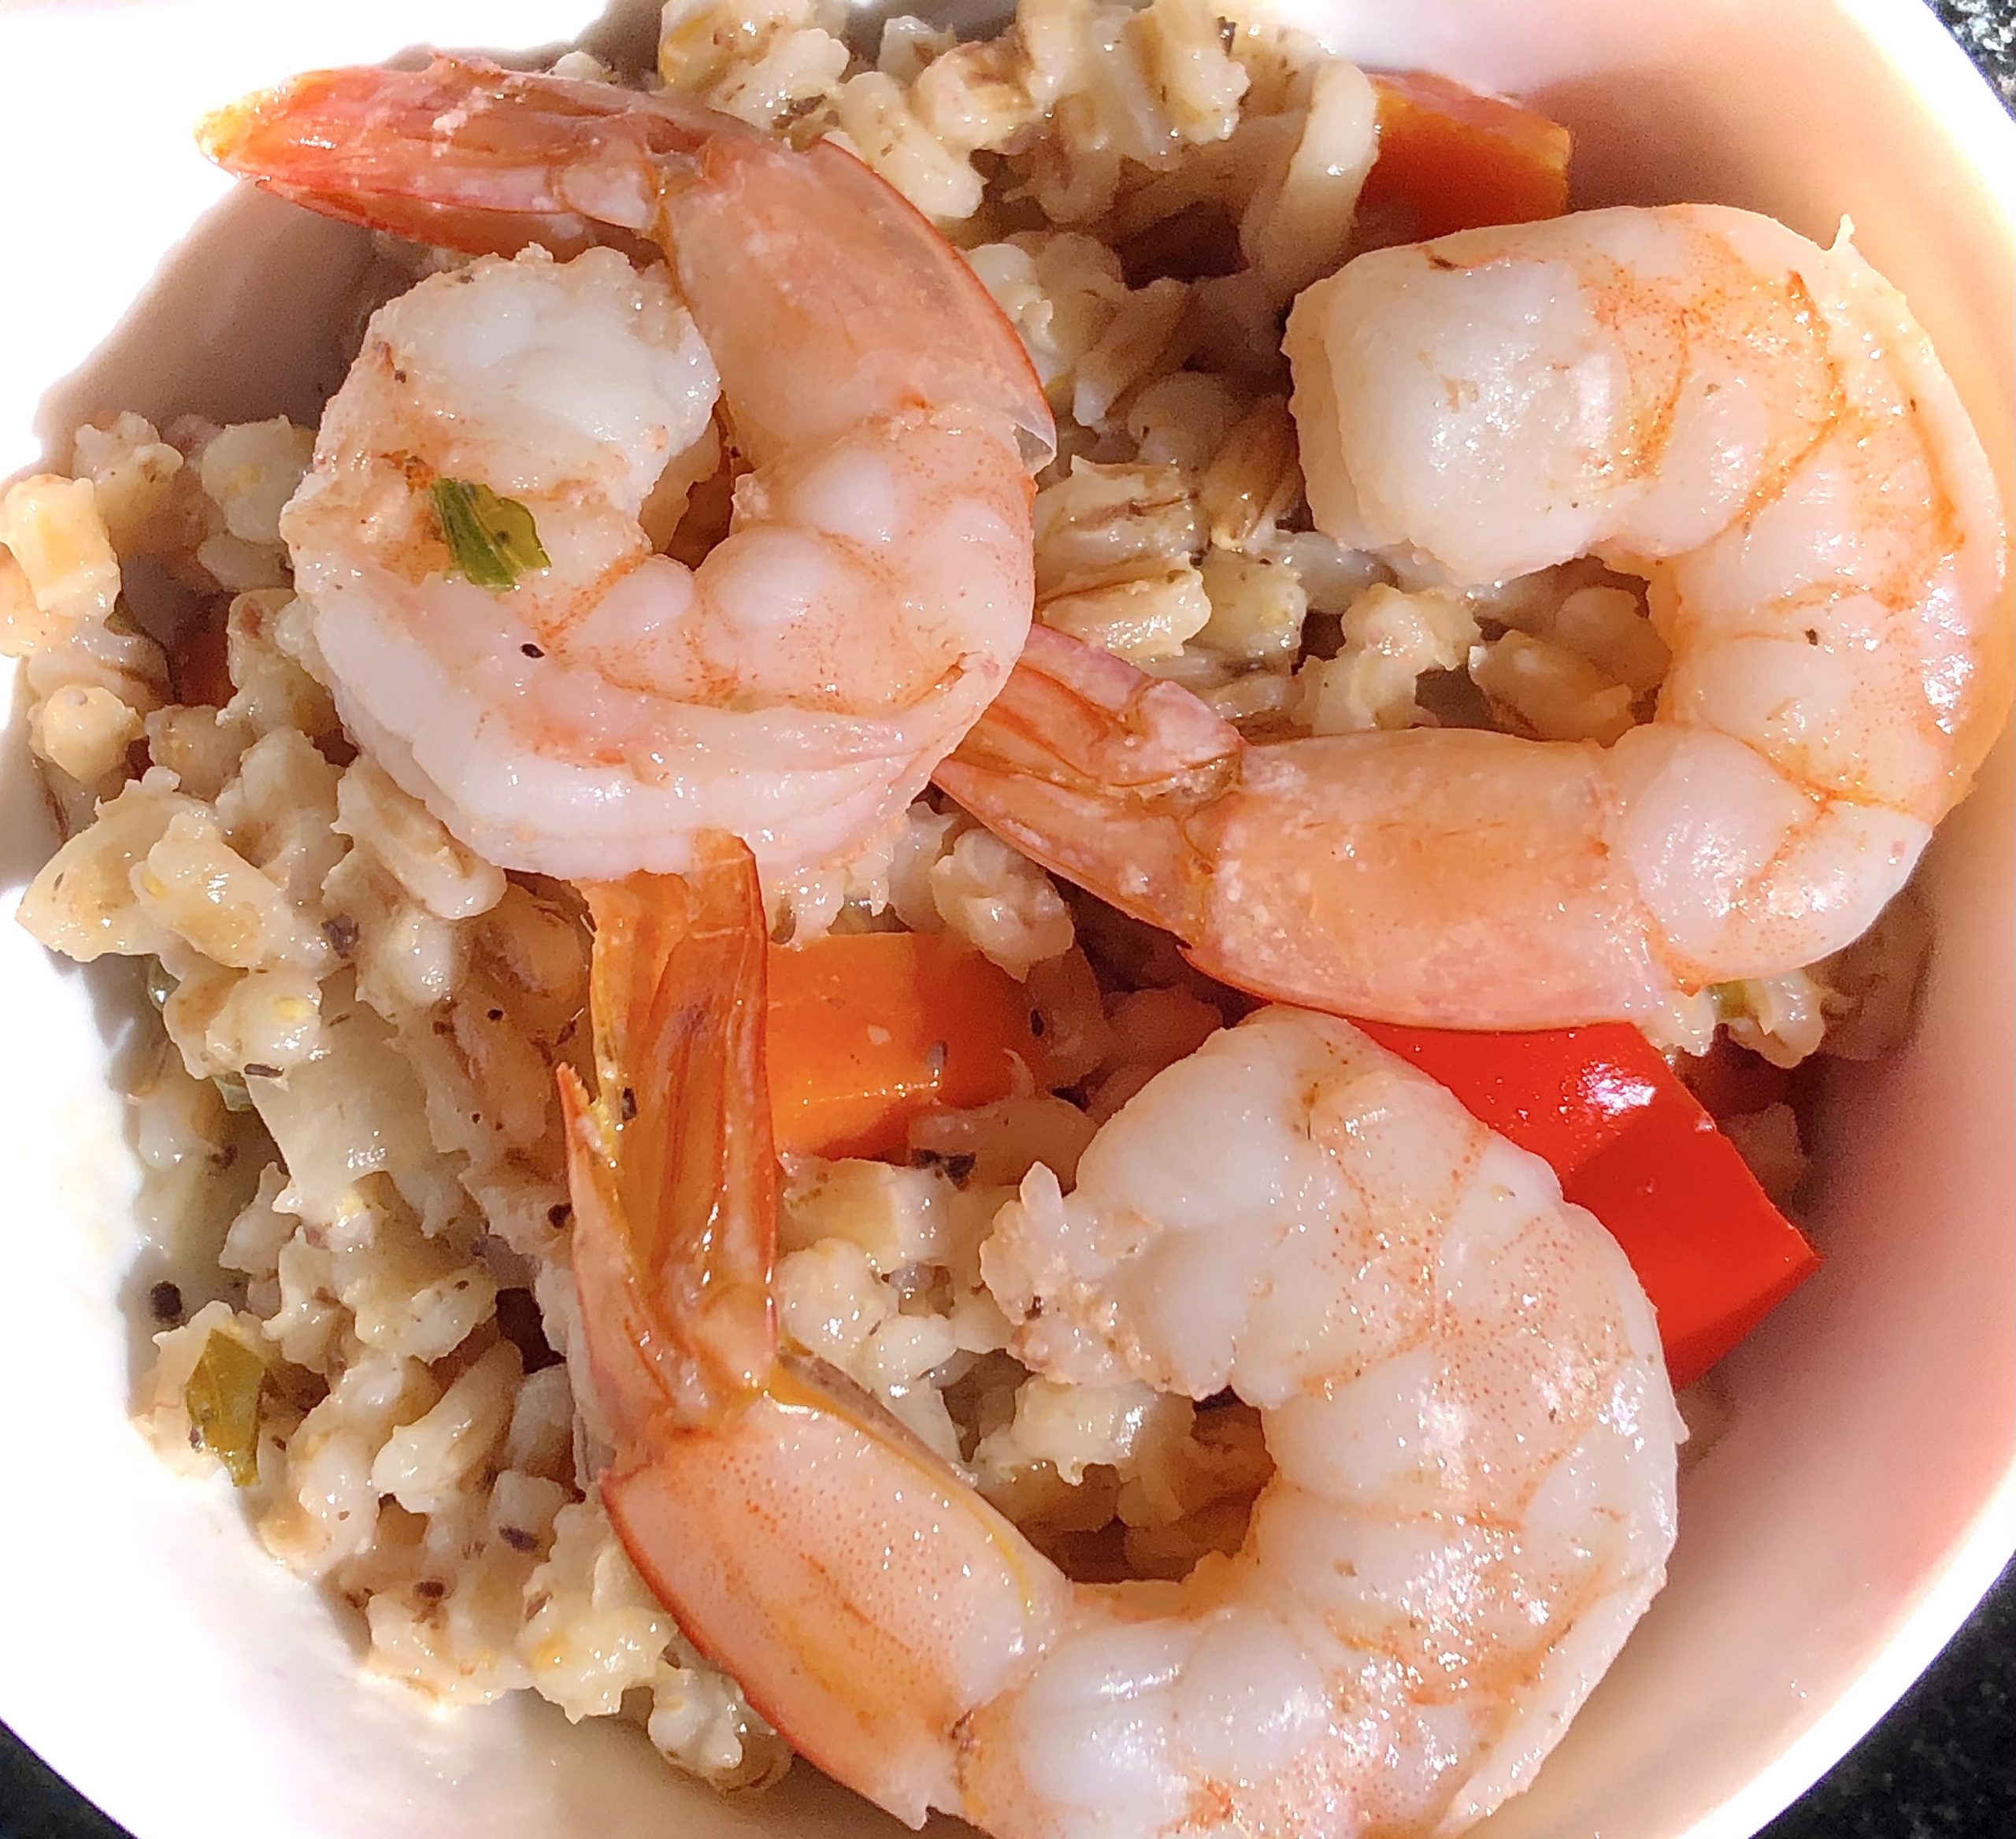 Barley risotto with shrimps